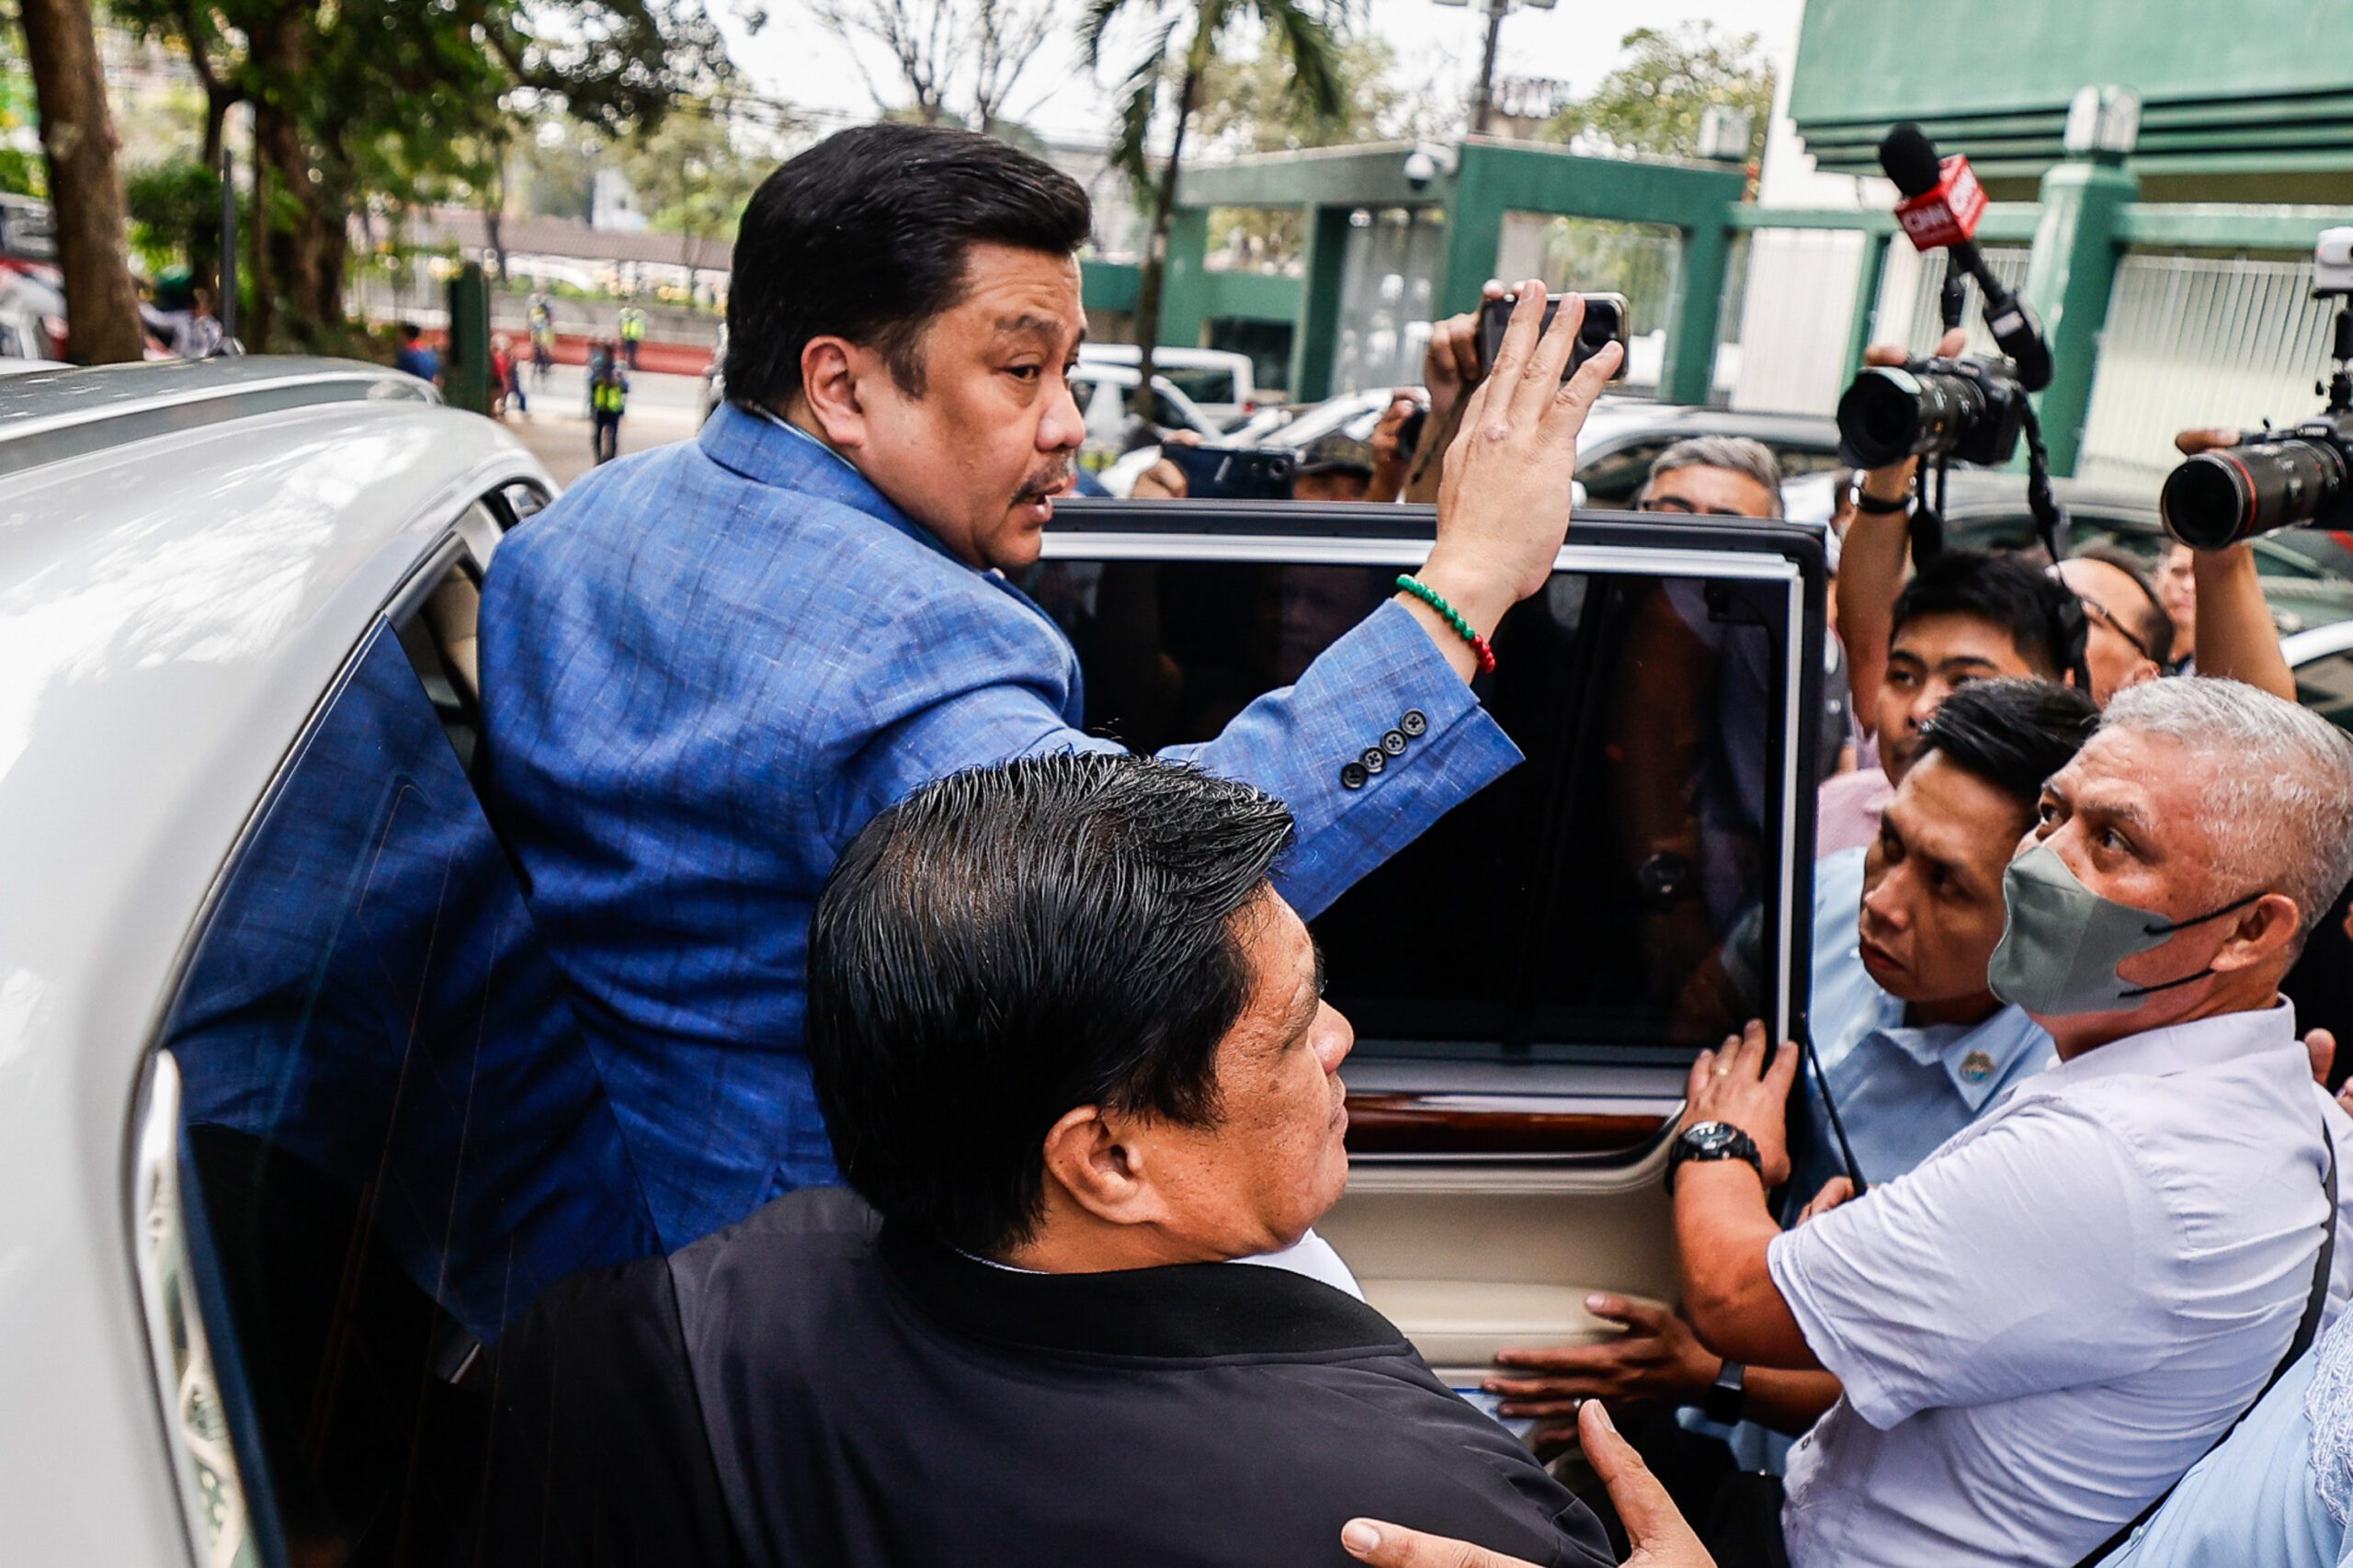 ‘Scam variant’ explained: Estrada accepted bribe, but did not commit plunder?